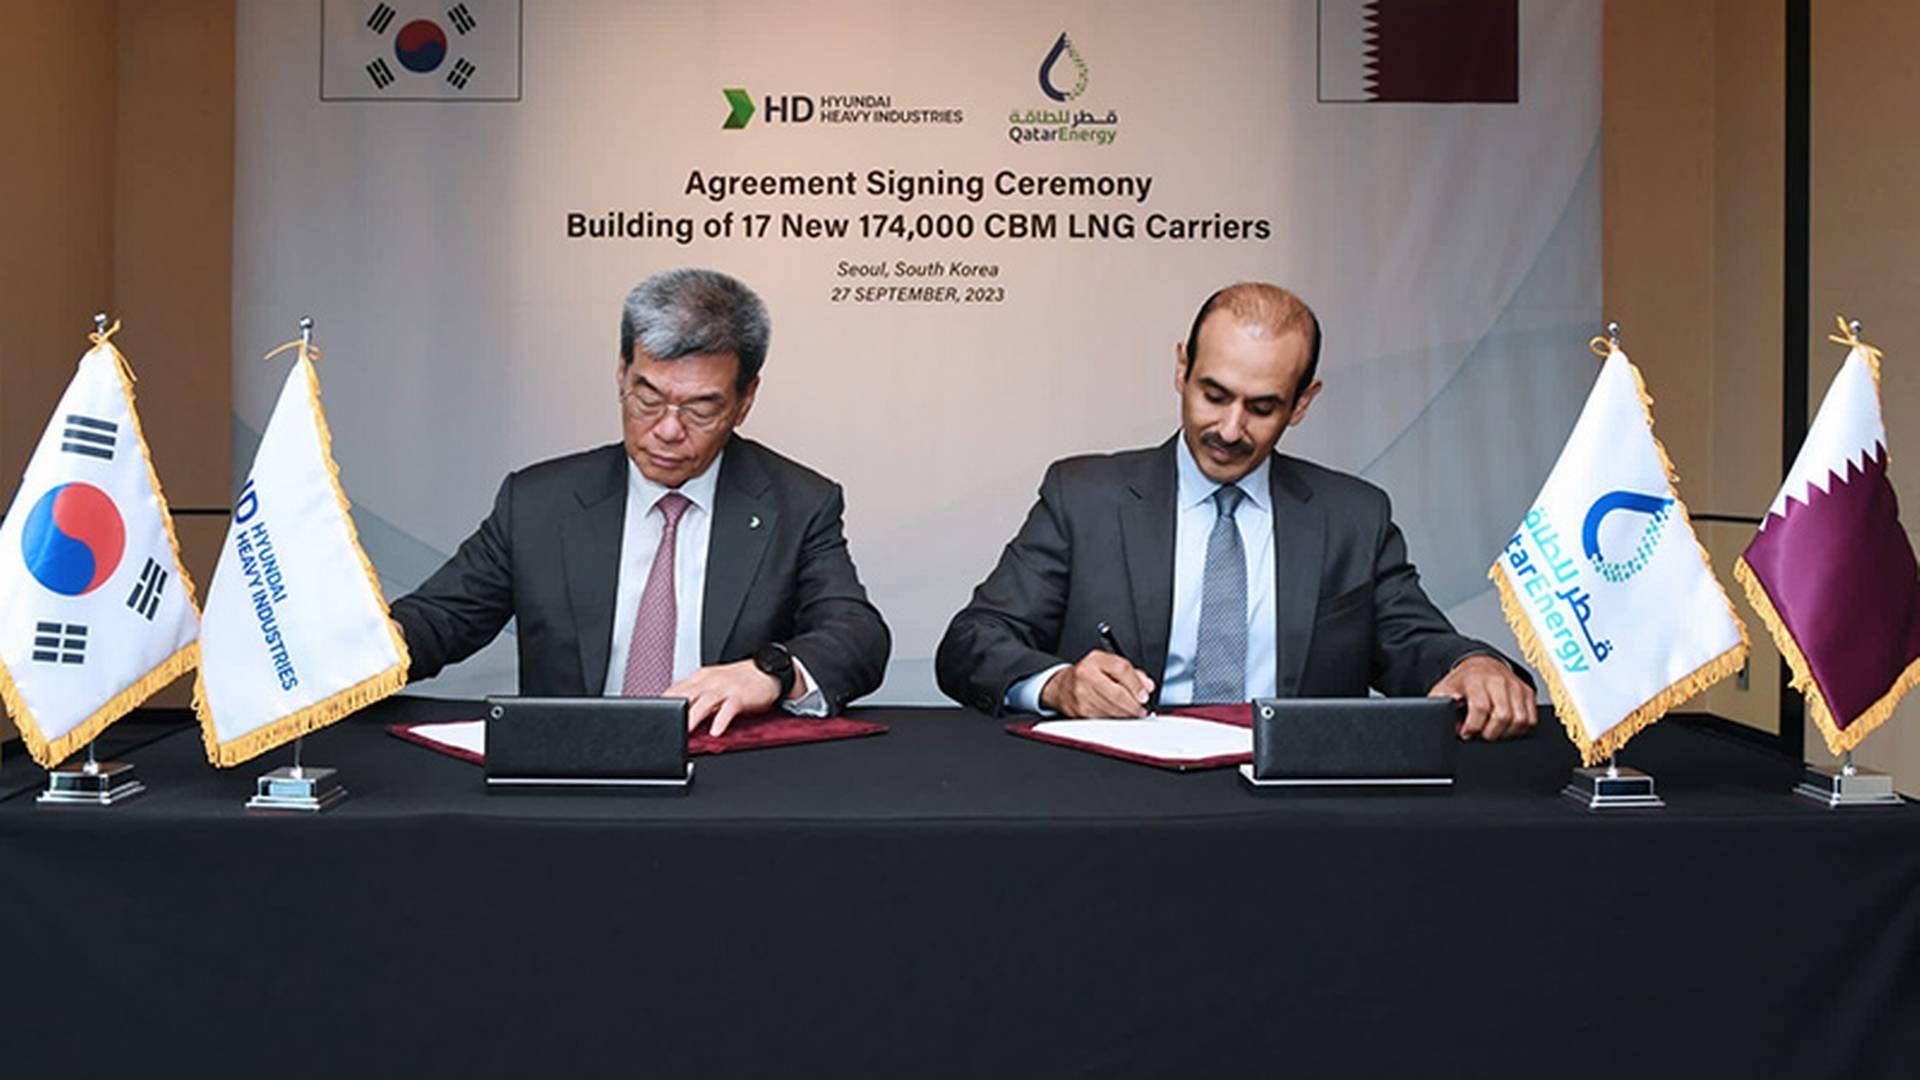 The management of South Korean shipbuilder Samsung Heavy Industries Co. signs a huge order for the delivery of LNG carriers to the Middle East on an earlier occasion. | Photo: Qatarenergy